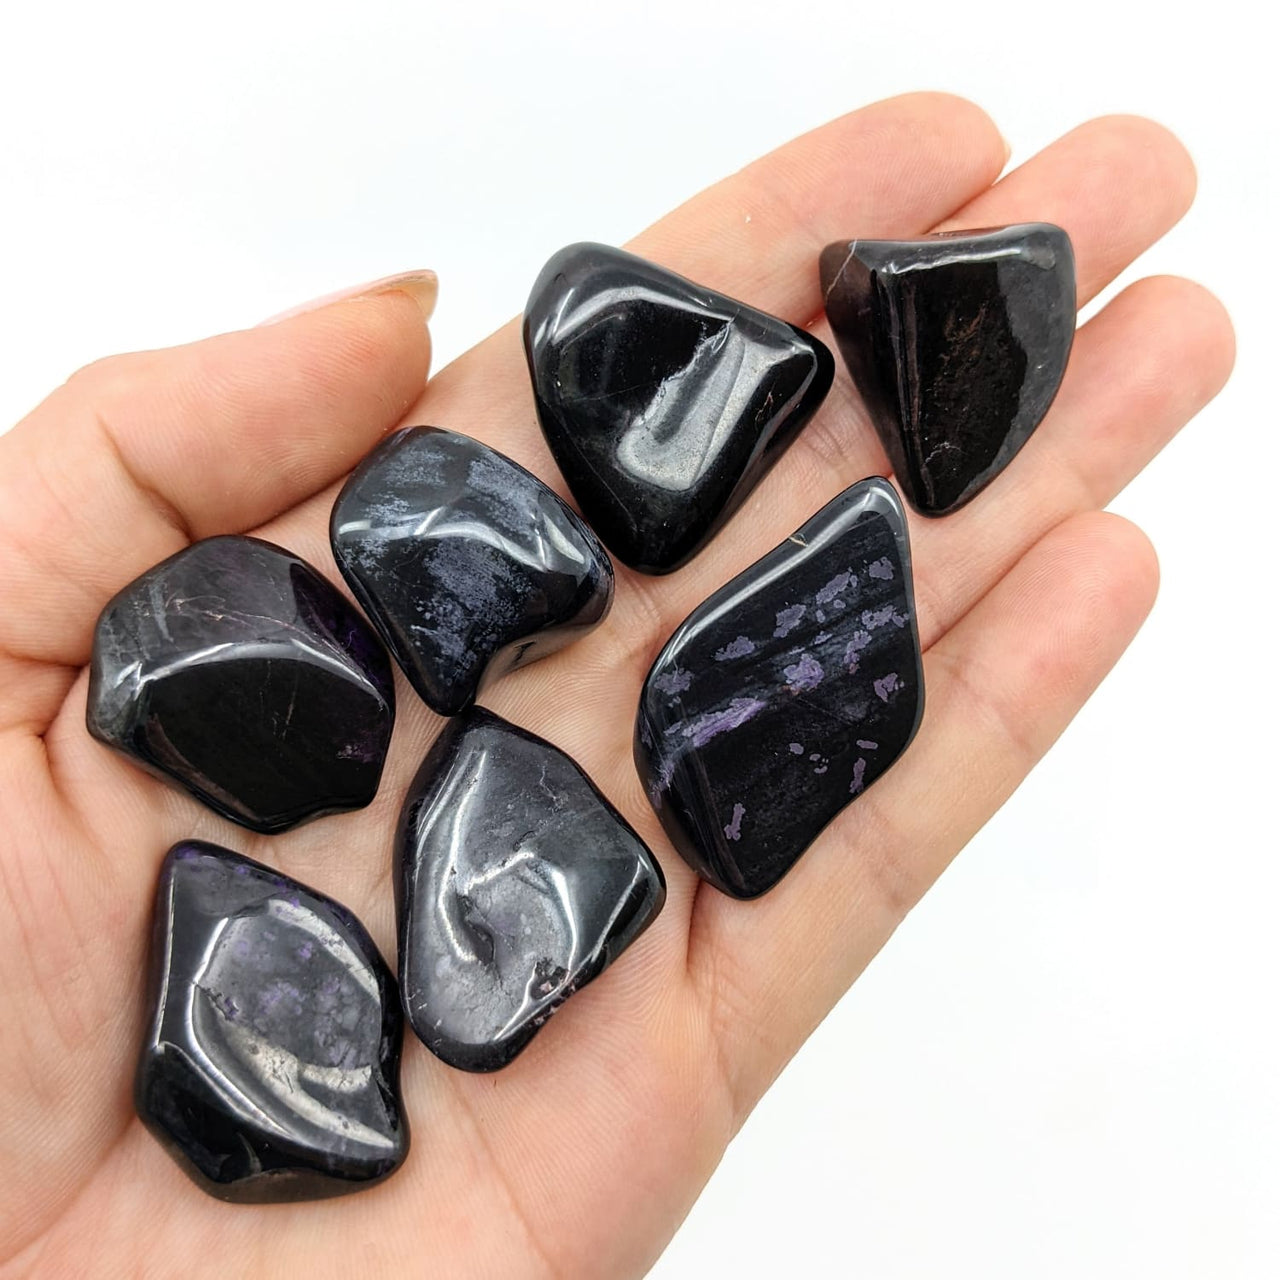 1 Sugilite Dark Small Tumbled (approx. 13g and less) #SK8016